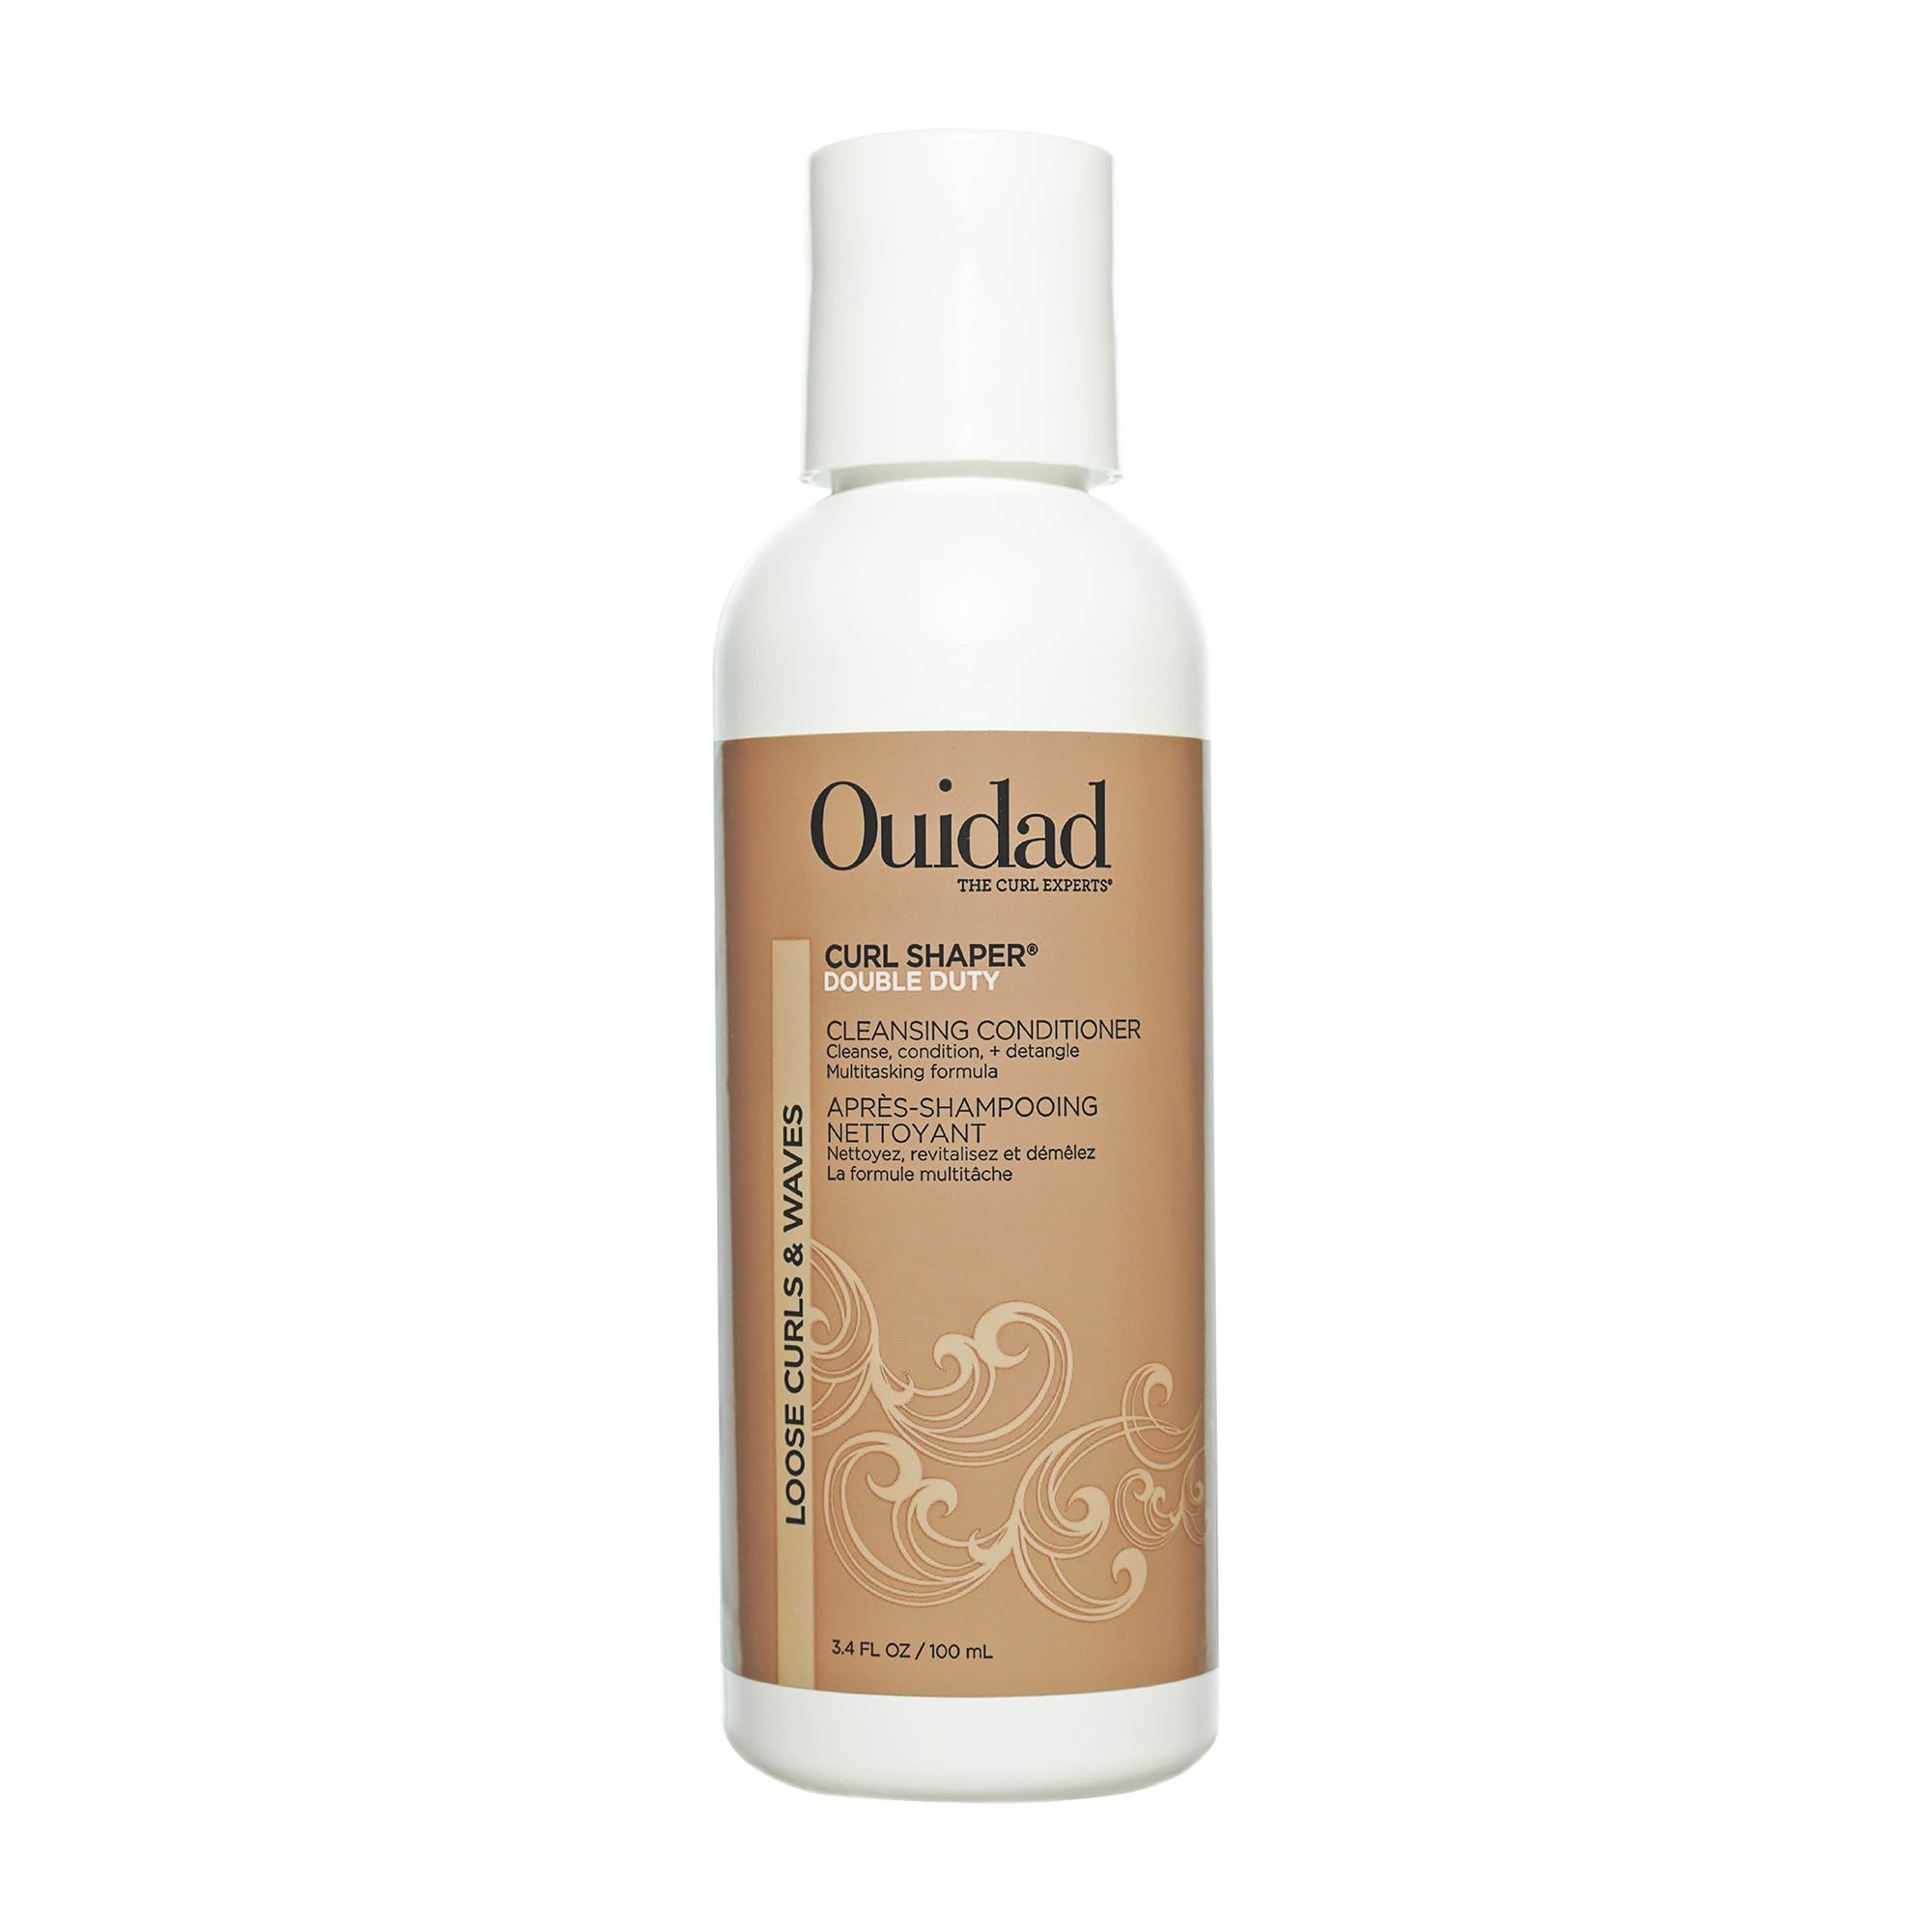 Ouidad Mini Curl Shaper Double Duty Cleansing Conditioner for Loose Curls and Waves - Sulfate Free - Travel Size 3.4oz